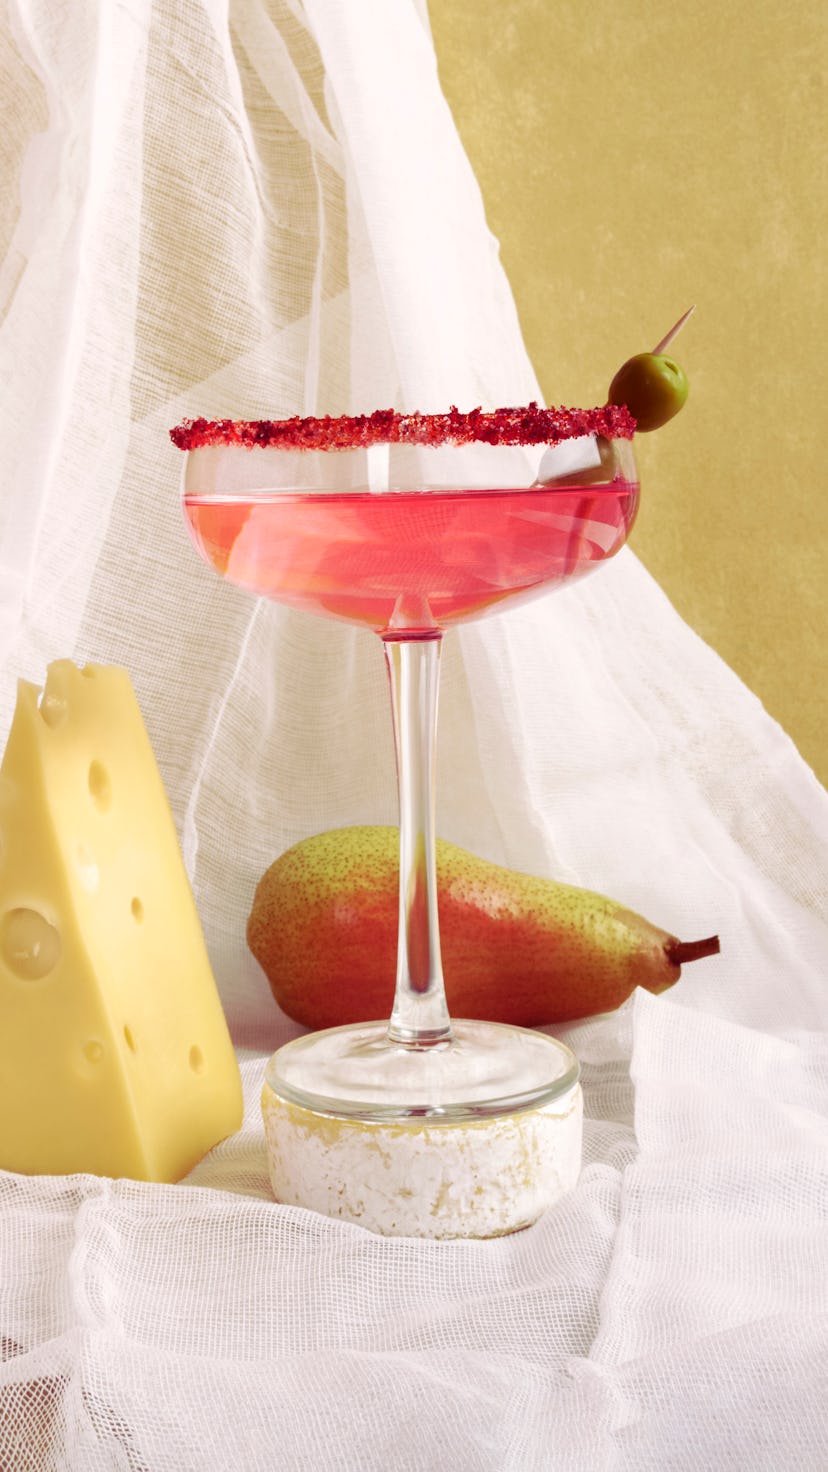 Rose wine cheese and pear still life. Front view against a background of white fabric.